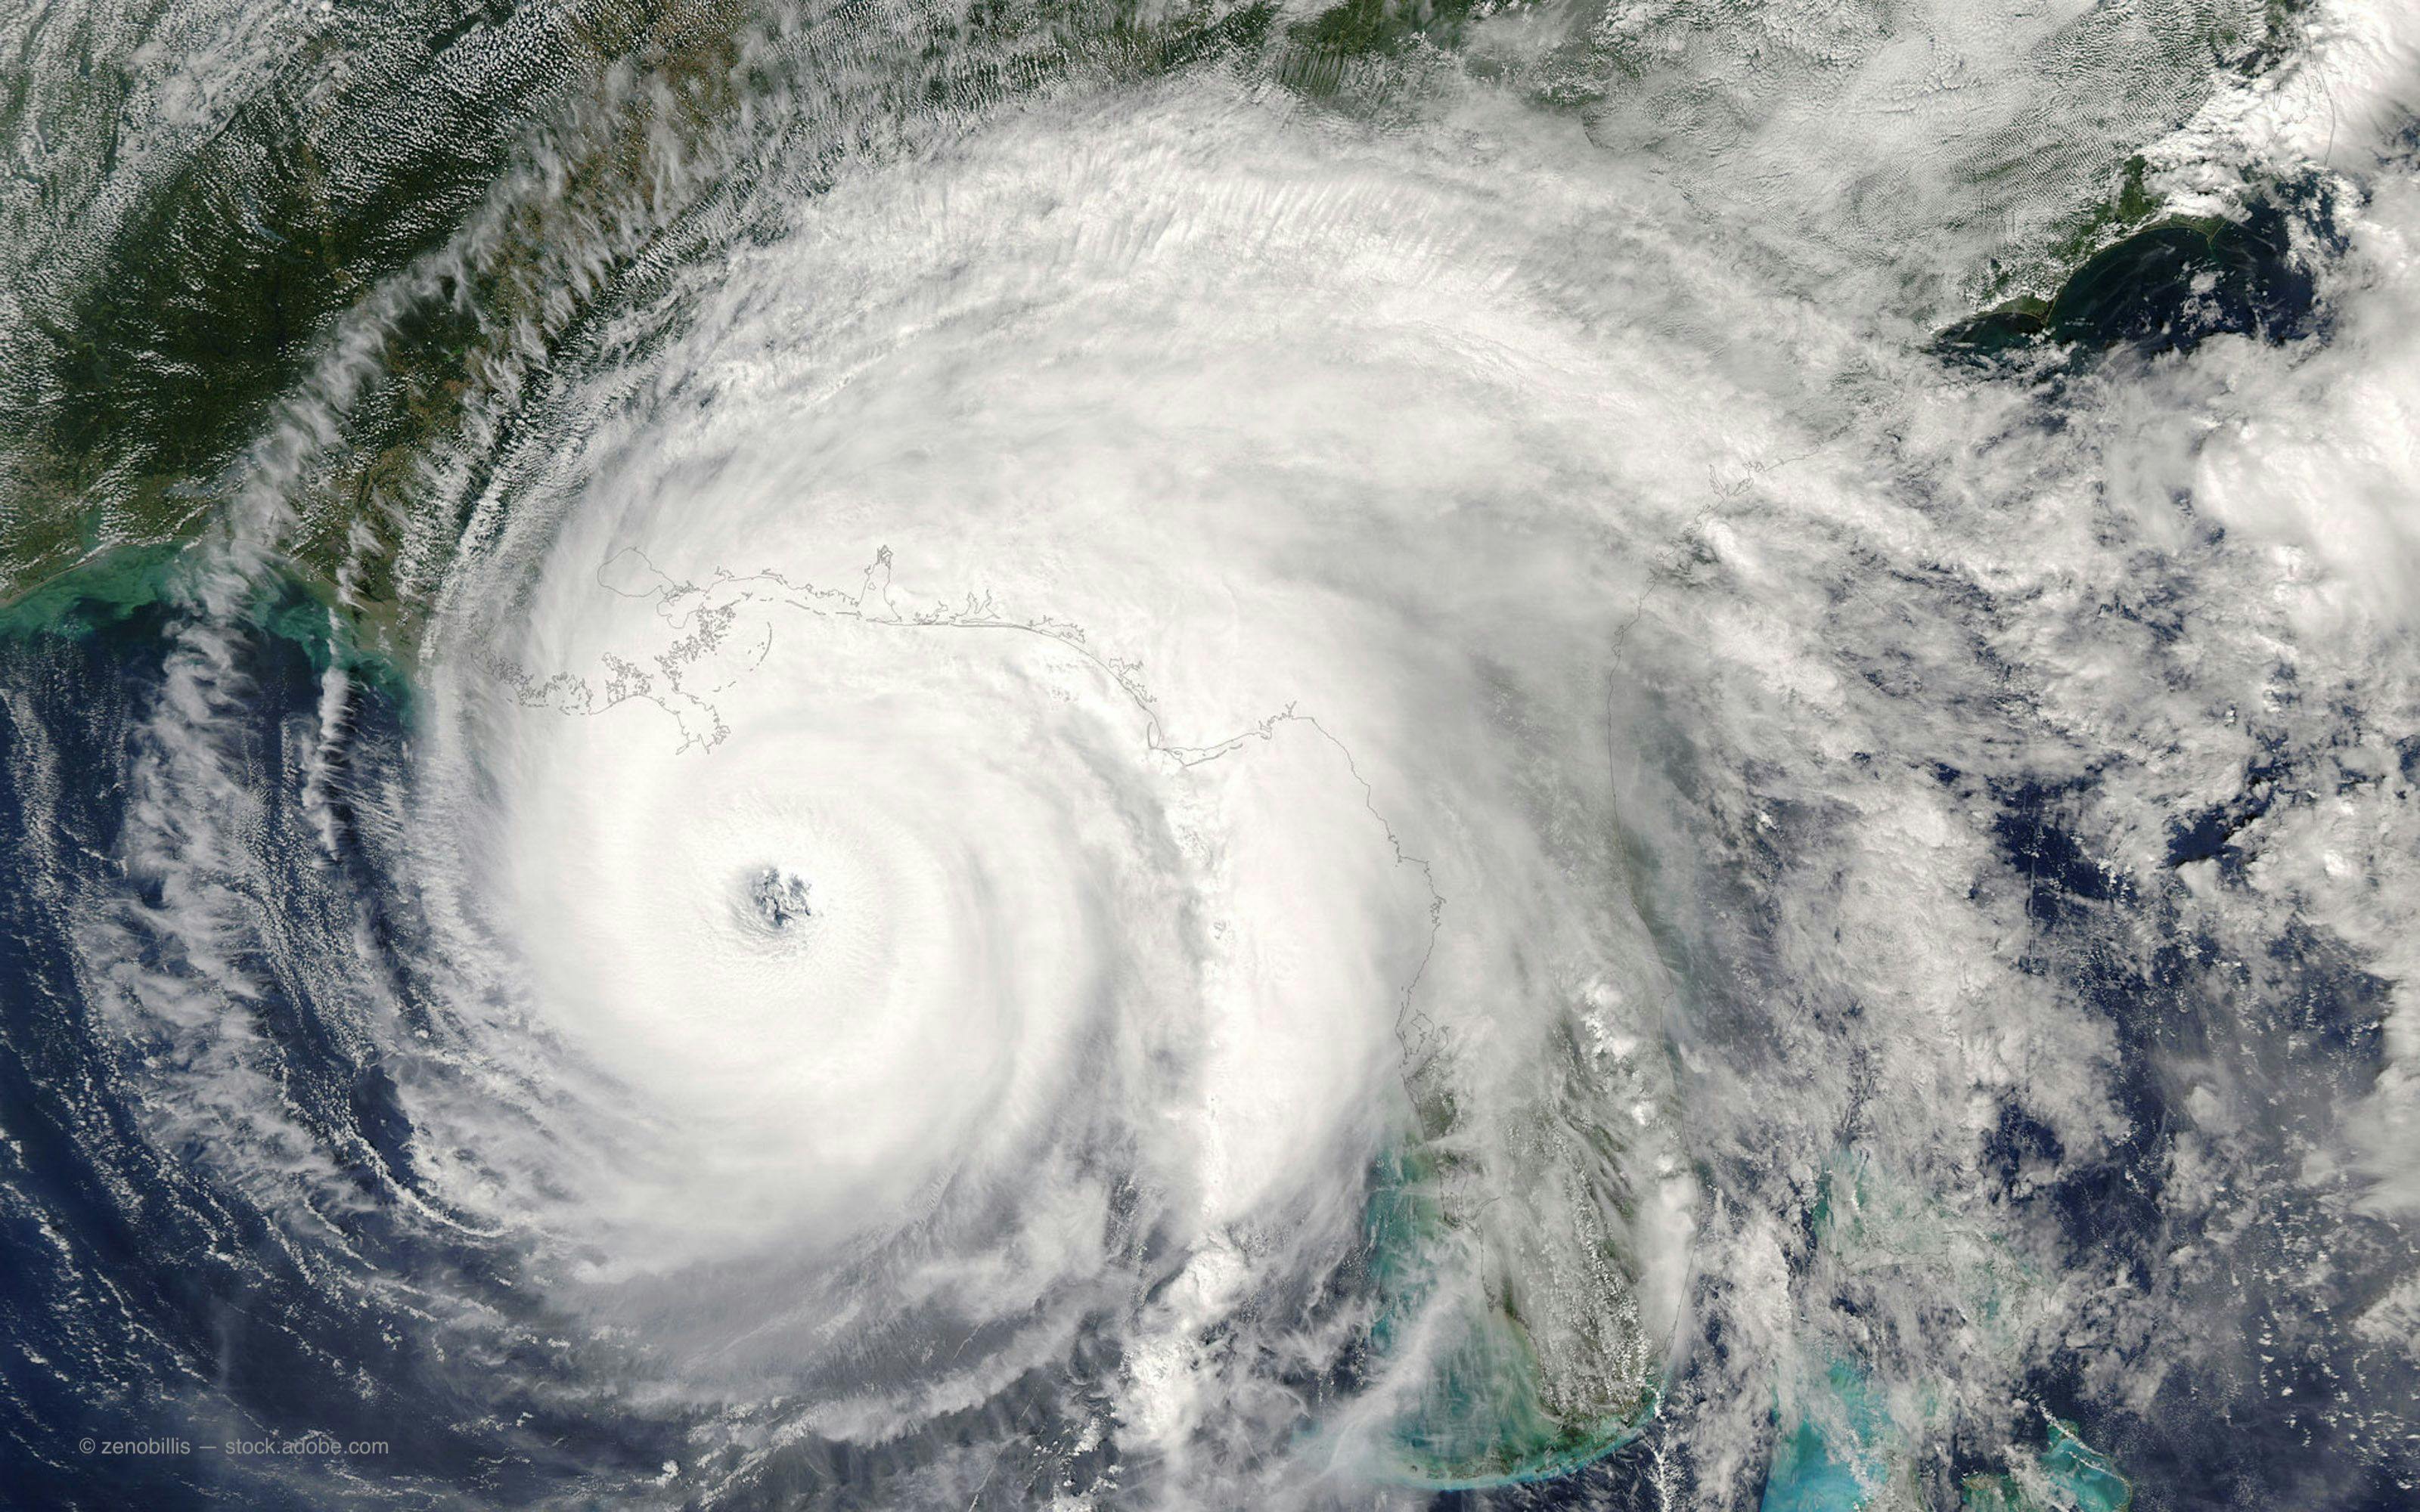  In the wake of Hurricane Ida, ophthalmologists in Louisiana are dealing with the storm’s aftermath, having been forced to close practices and cancel appointments.